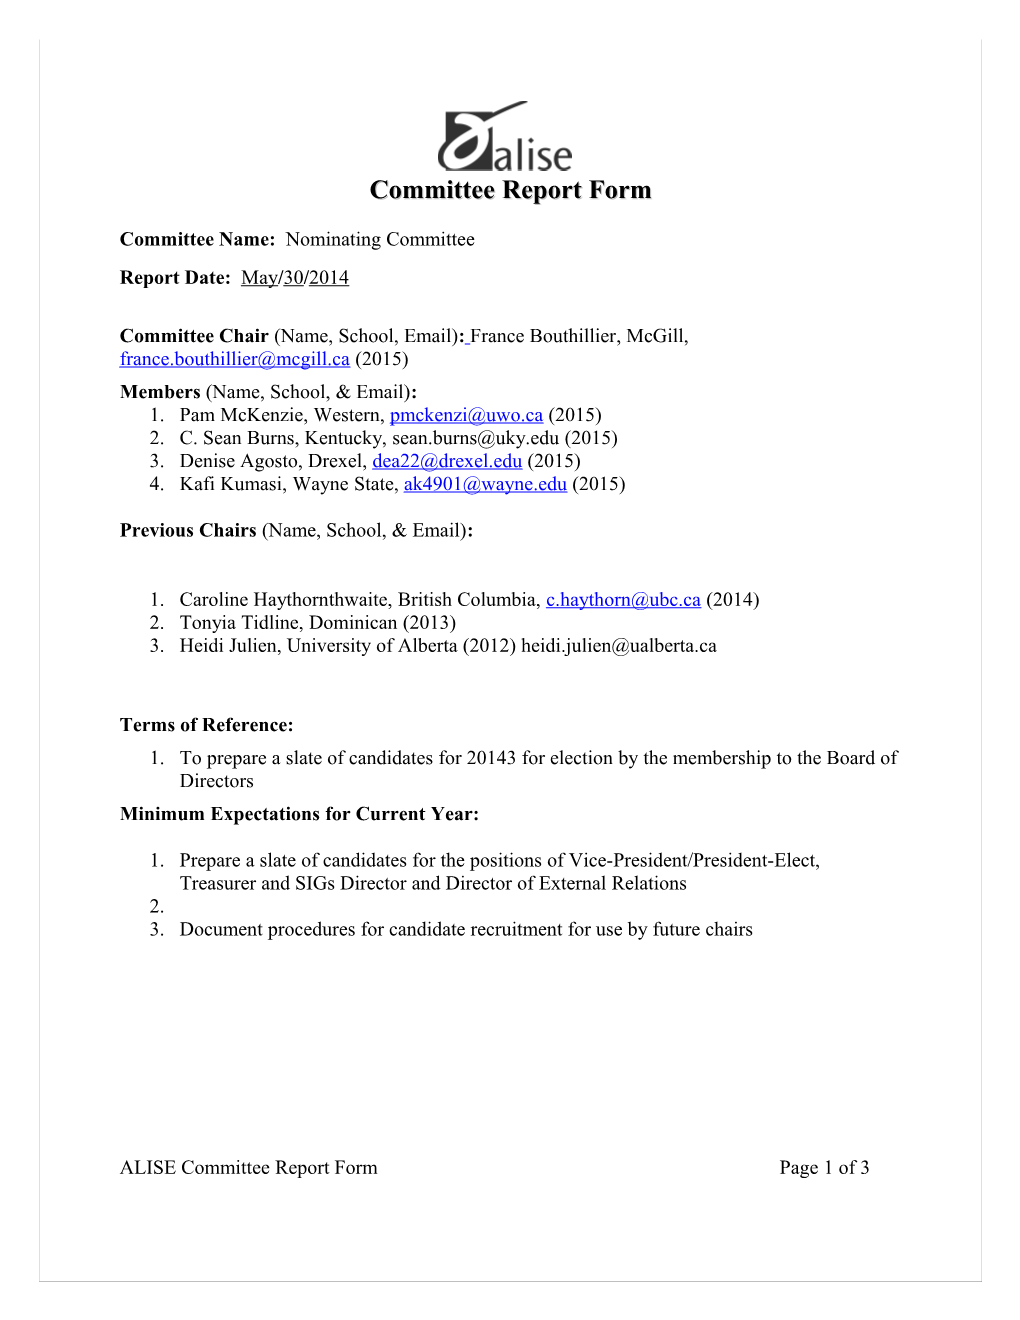 Annual Report Form for Committee Chairs Or Organizational Liaisons